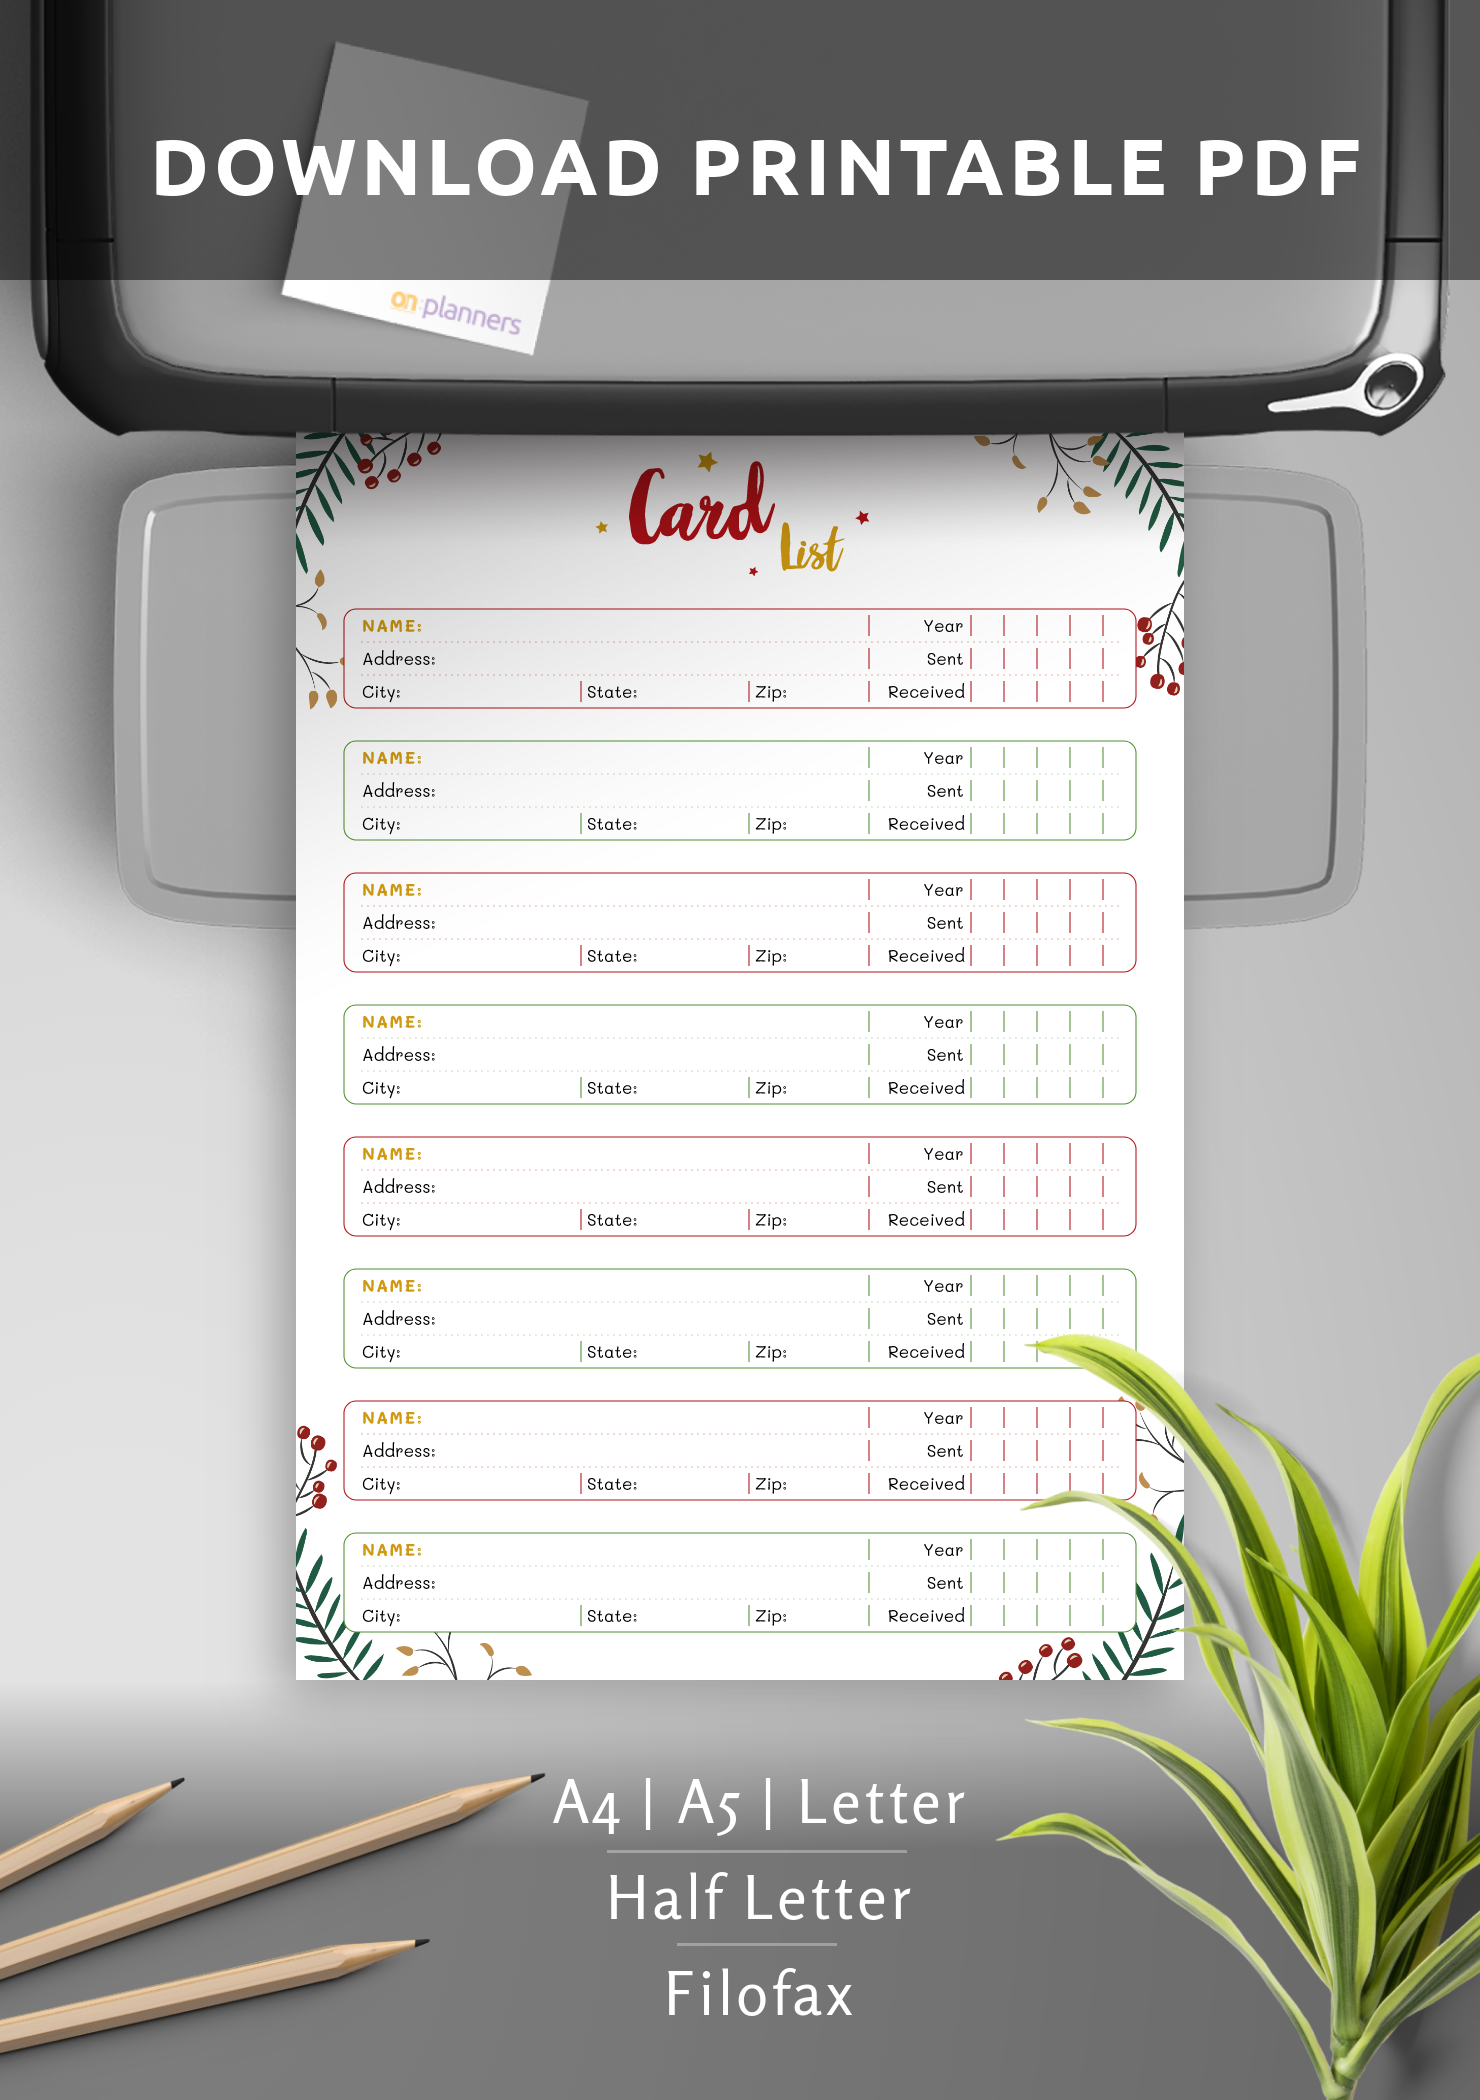 Download Printable Christmas Style - Card List PDF Intended For Christmas Card List Template